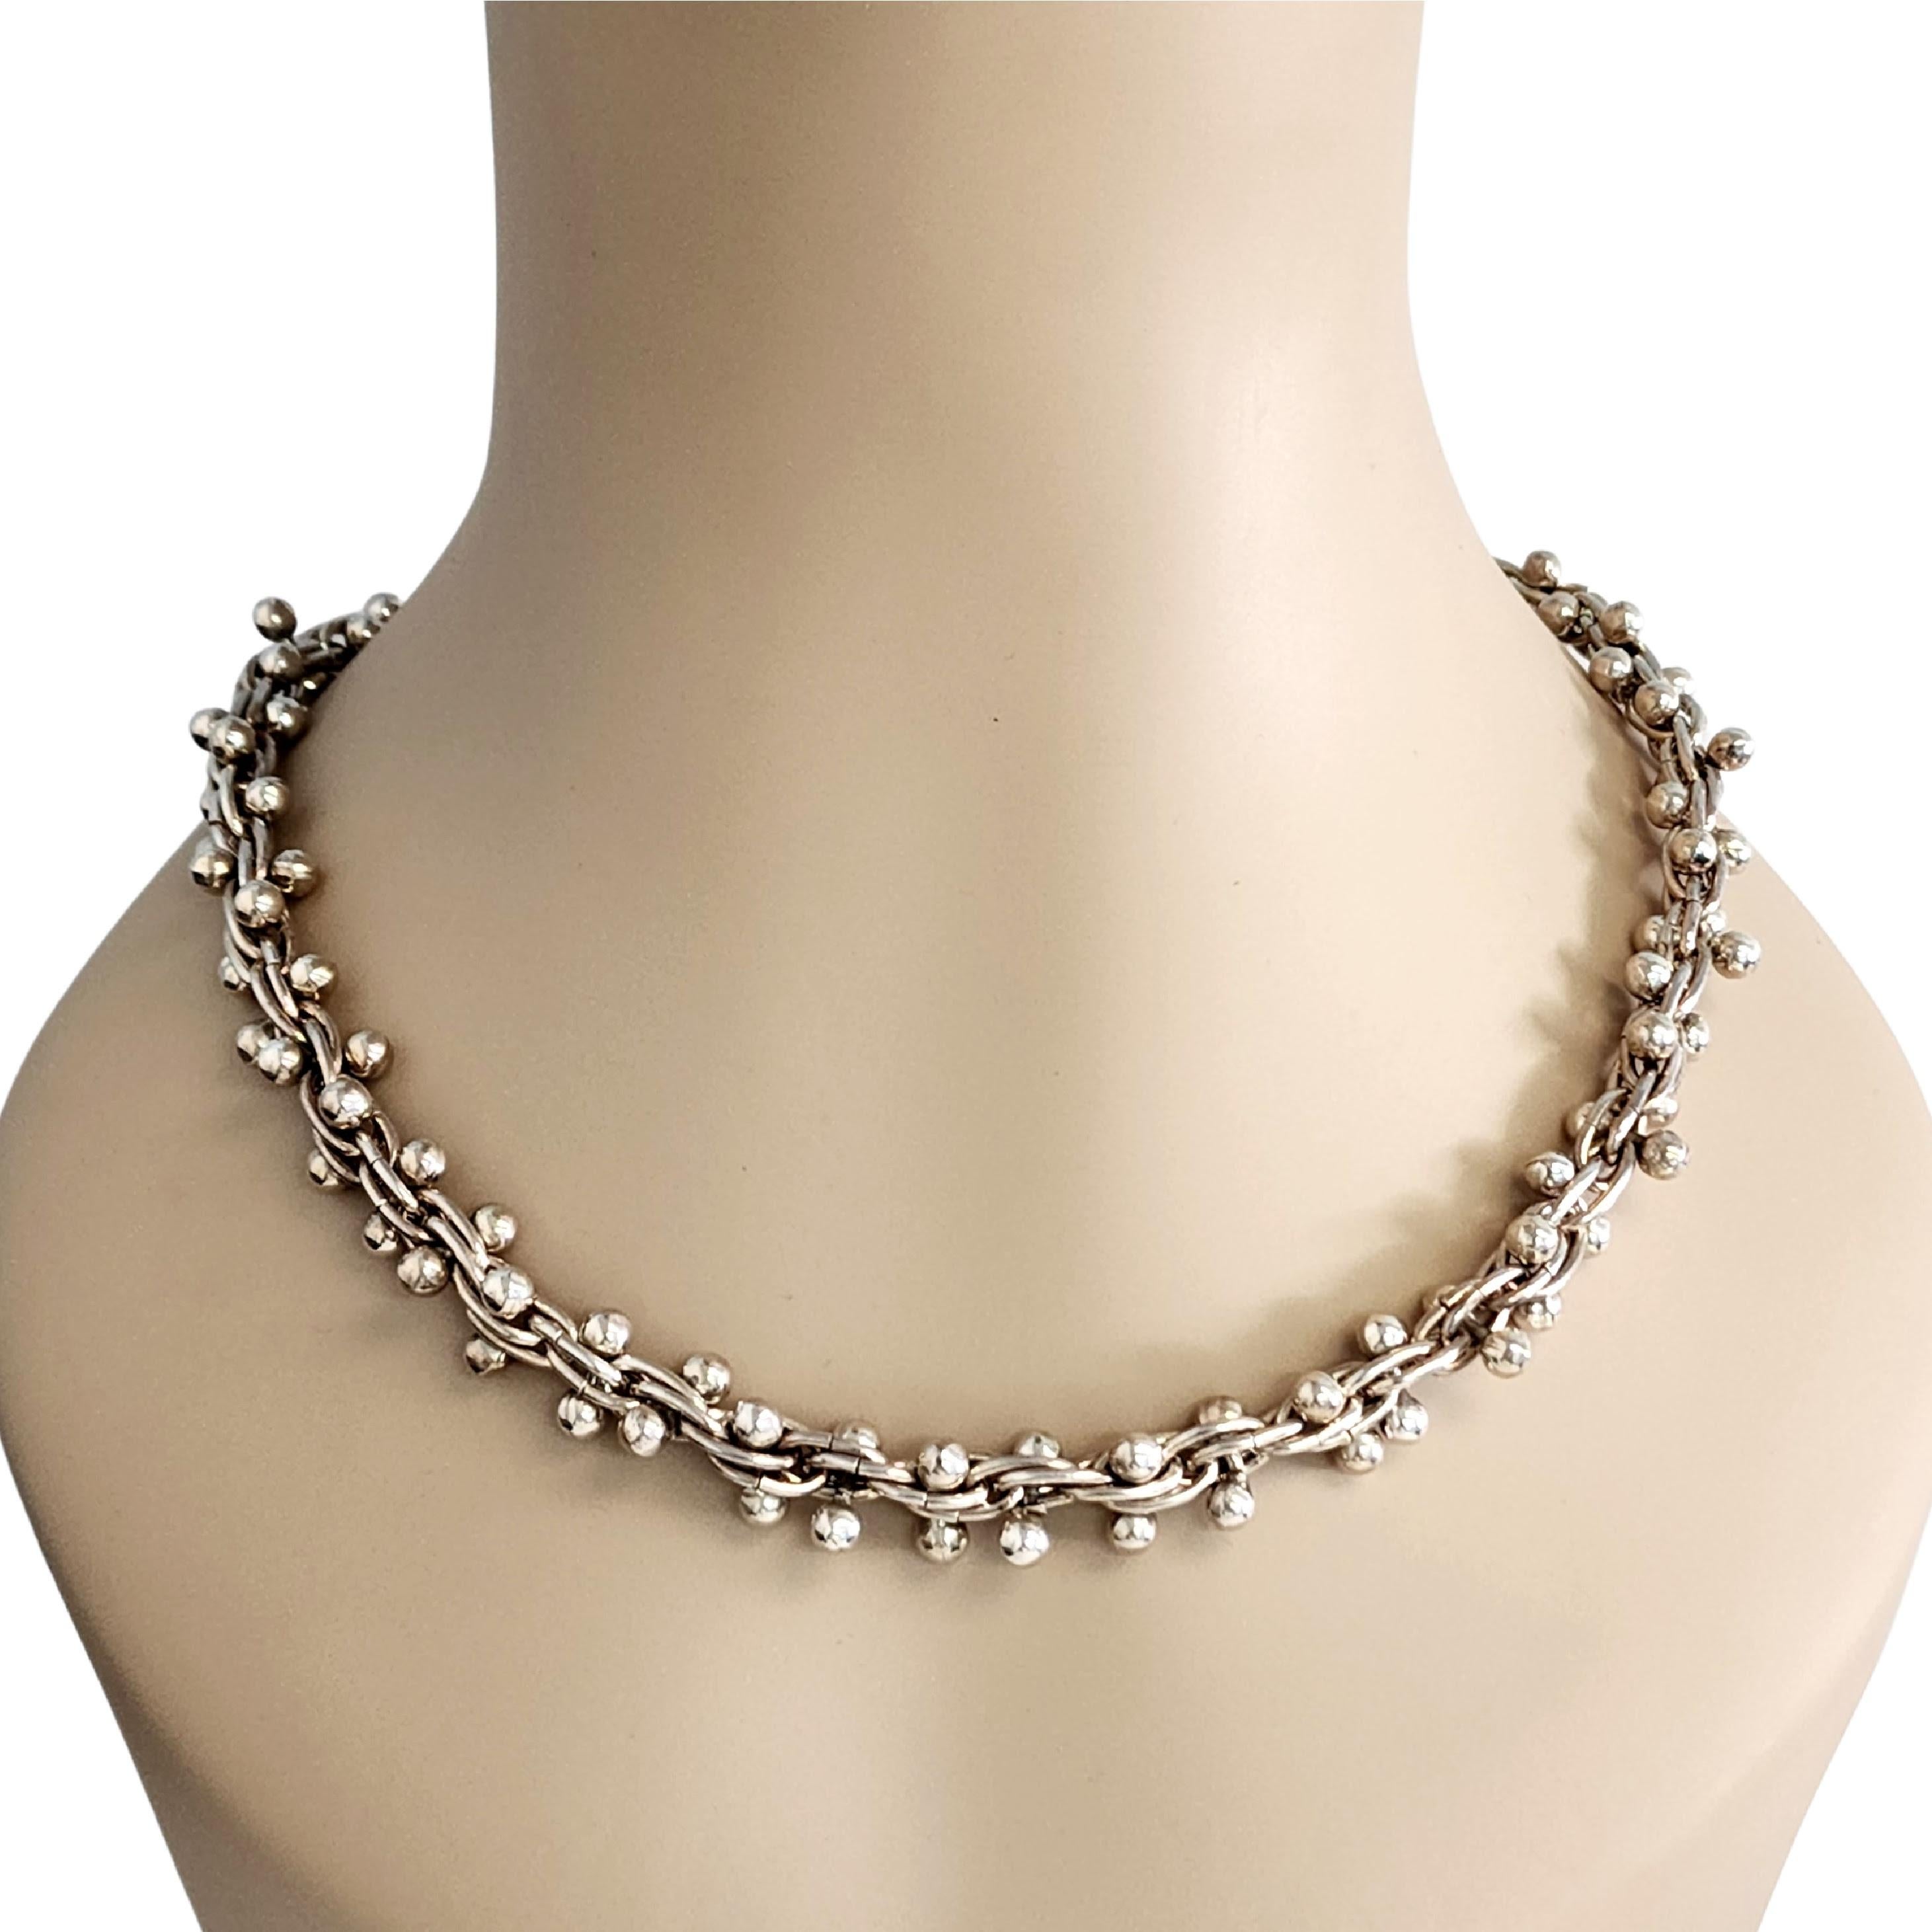 Sterling silver DNA weave and bead necklace by Taxco Mexico artisan, TJ-39.

Heavy and substantial necklace featuring a DNA weave design adorned with silver bead balls. Slide clasp closure.

Measures approx 20